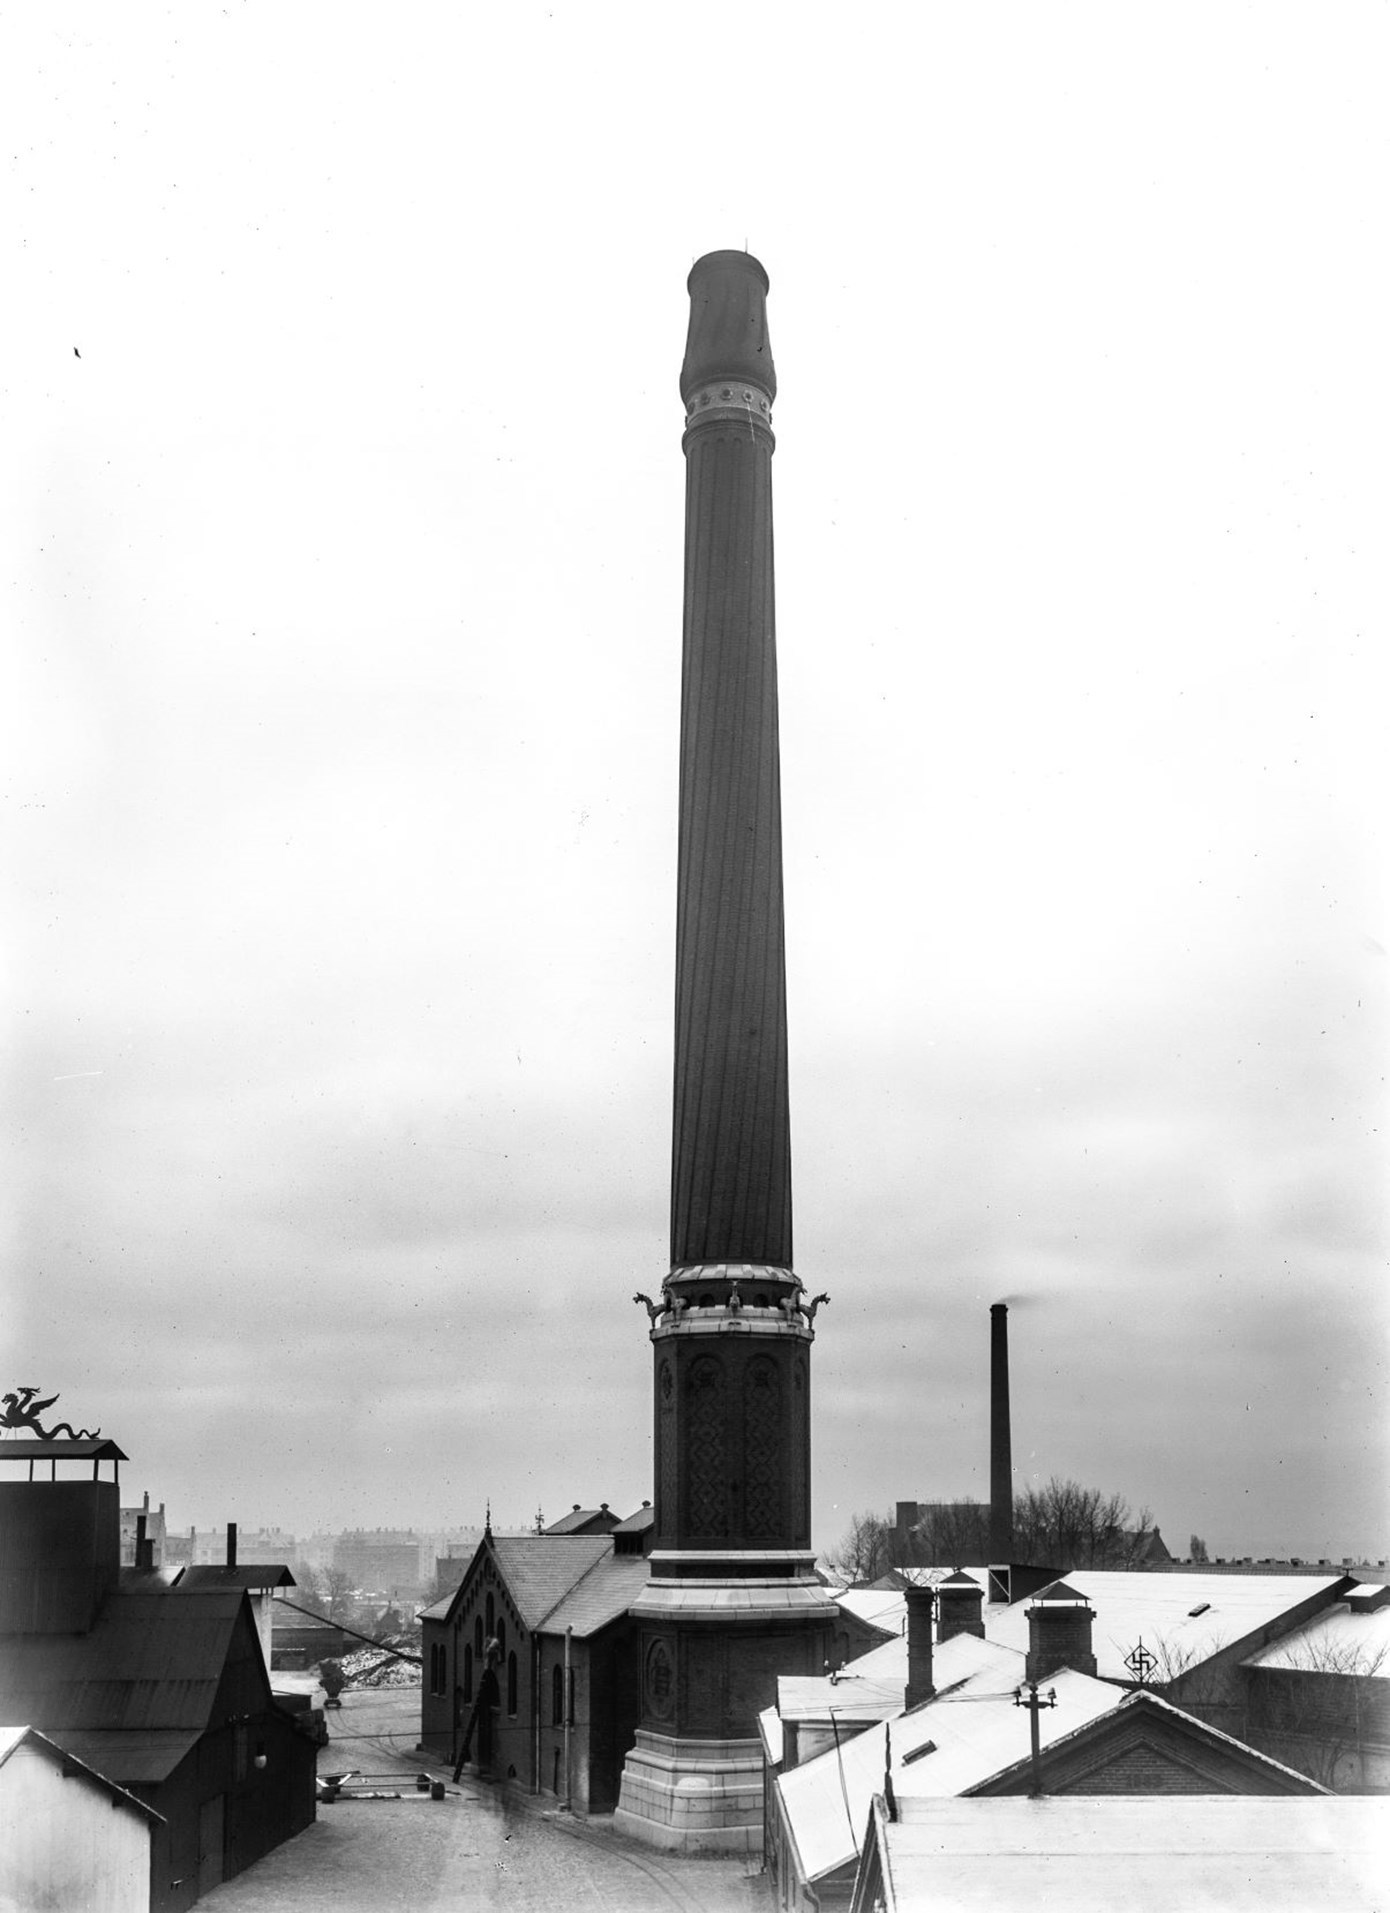 The Winding Chimney can still be seen at the Carlsberg site in Copenhagen